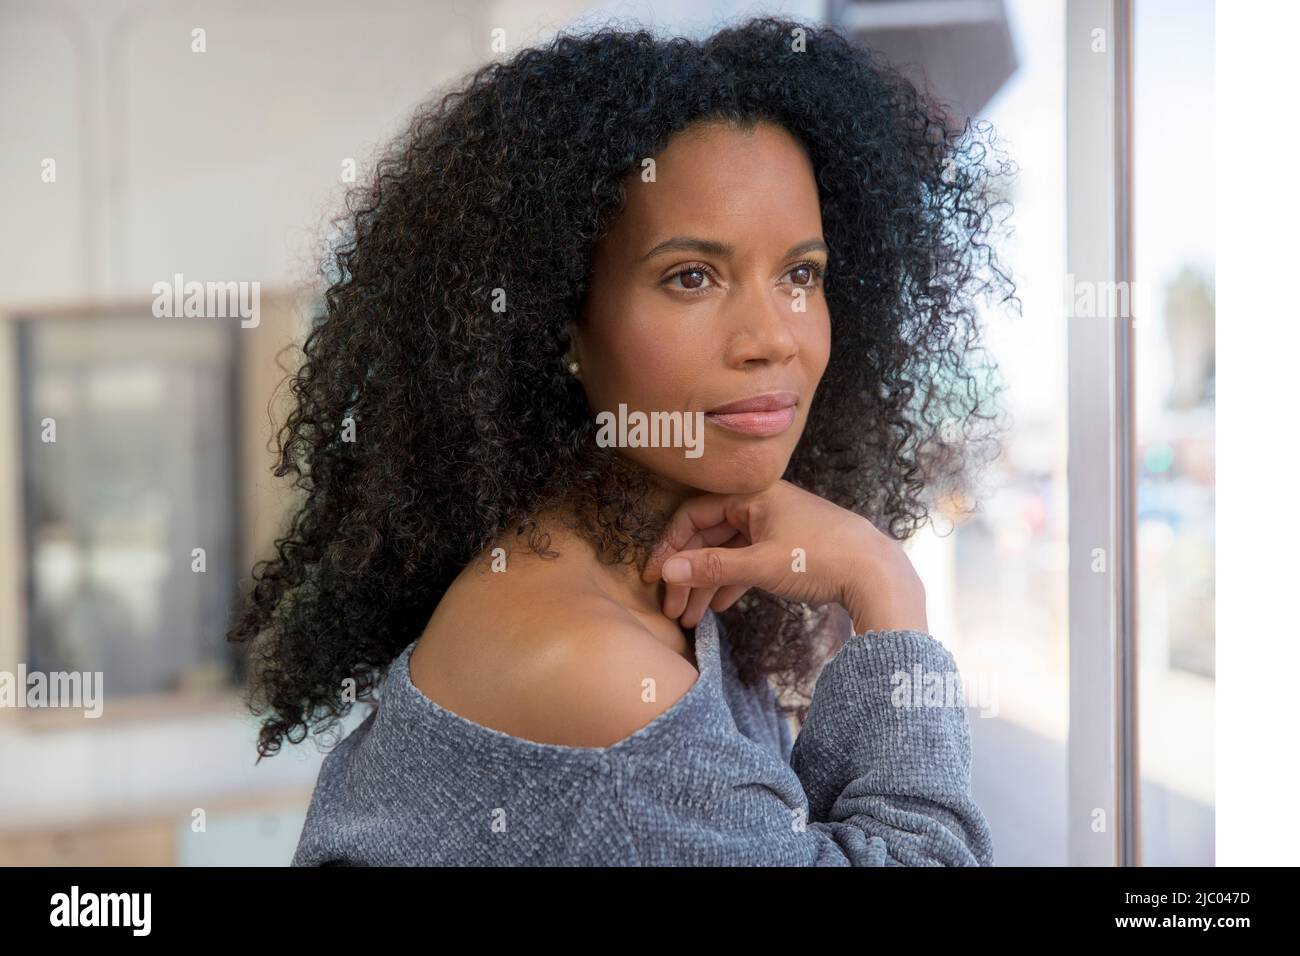 Middle-aged woman looks out a window with her hand under her chin. Stock Photo